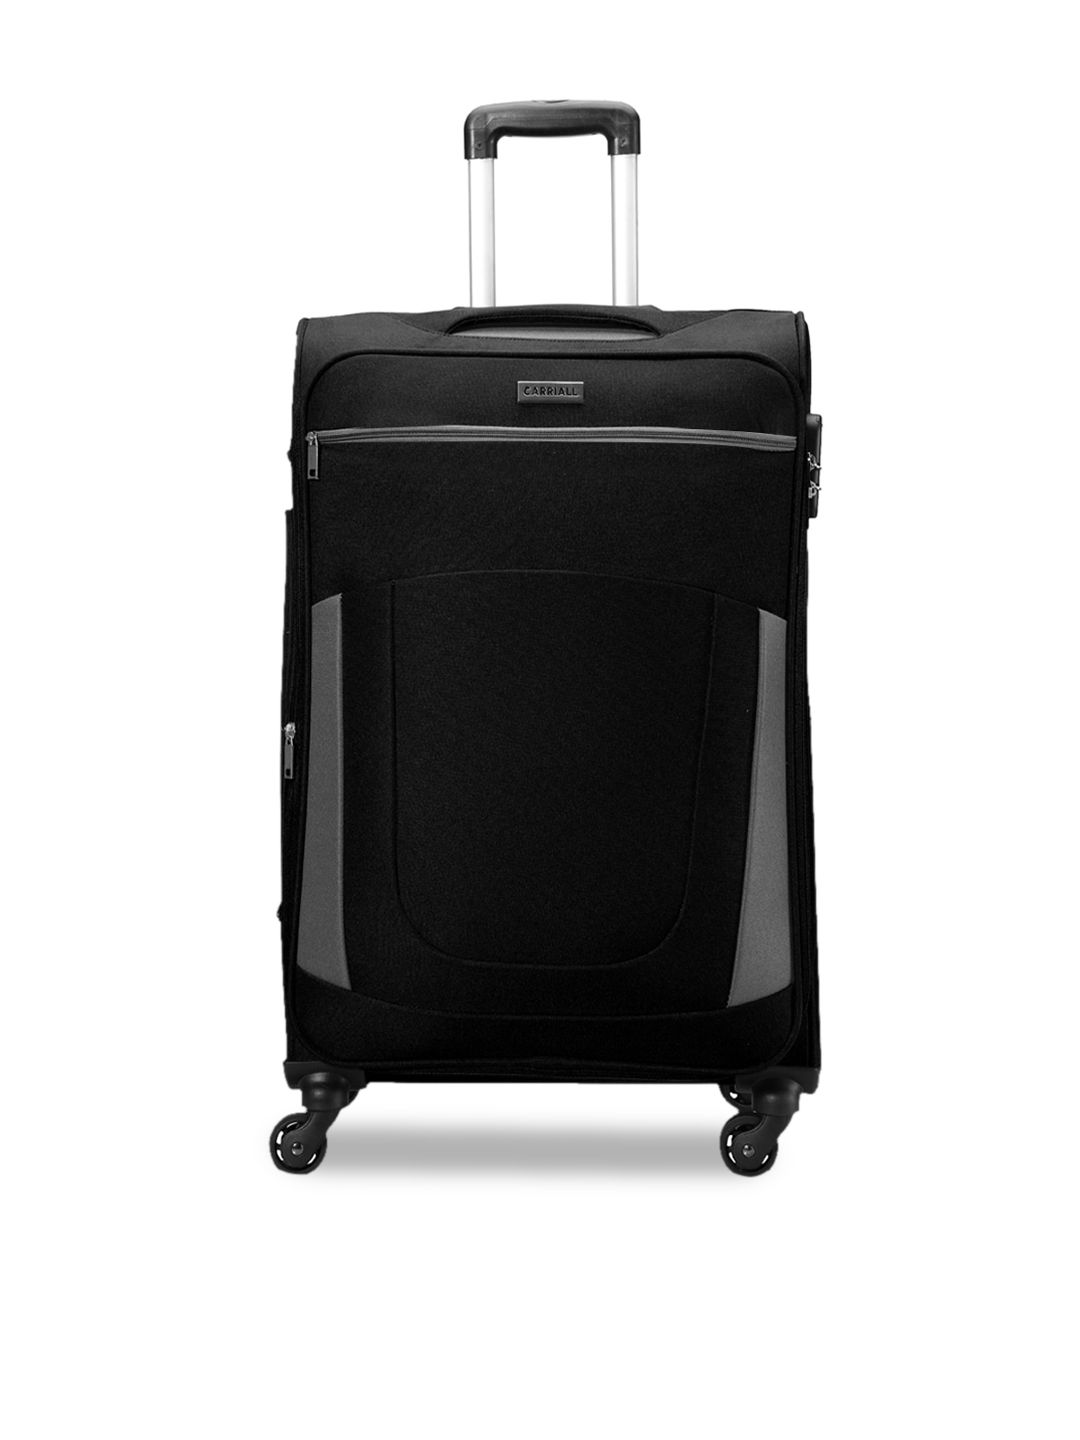 CARRIALL Black & Grey Solid Large Size Check-in Luggage Price in India